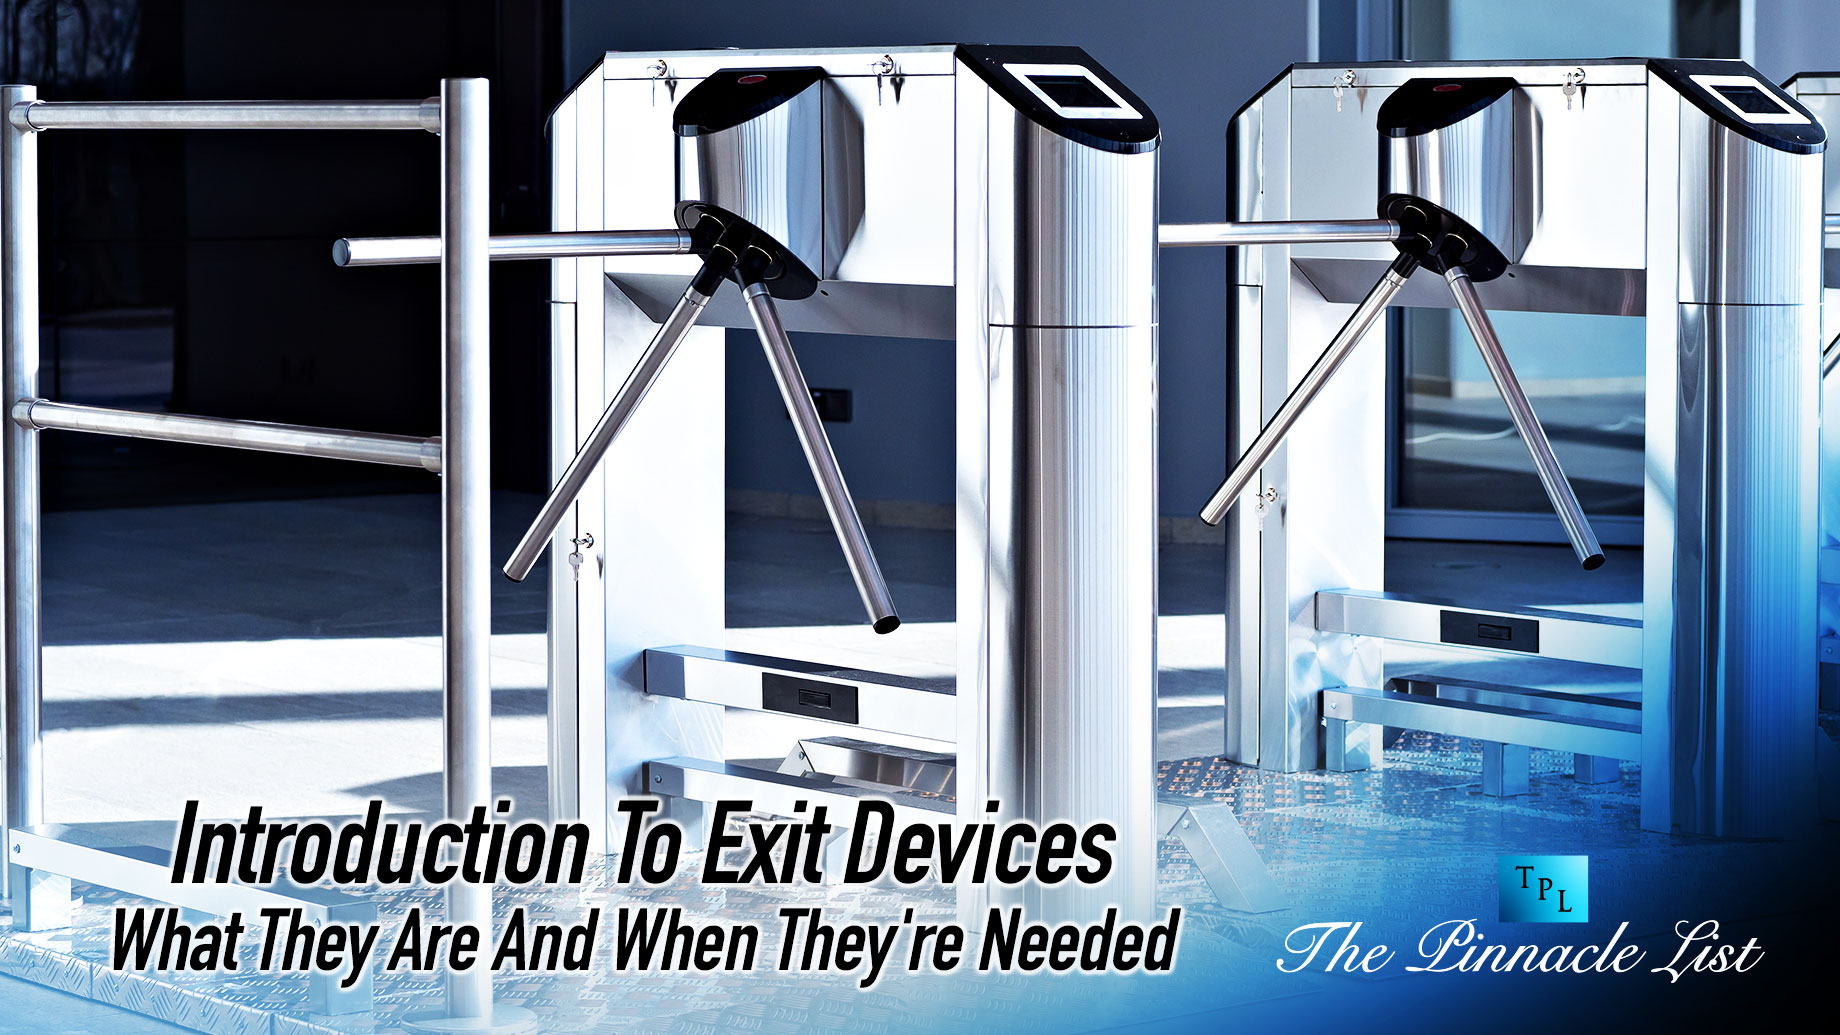 Introduction To Exit Devices: What They Are And When They're Needed